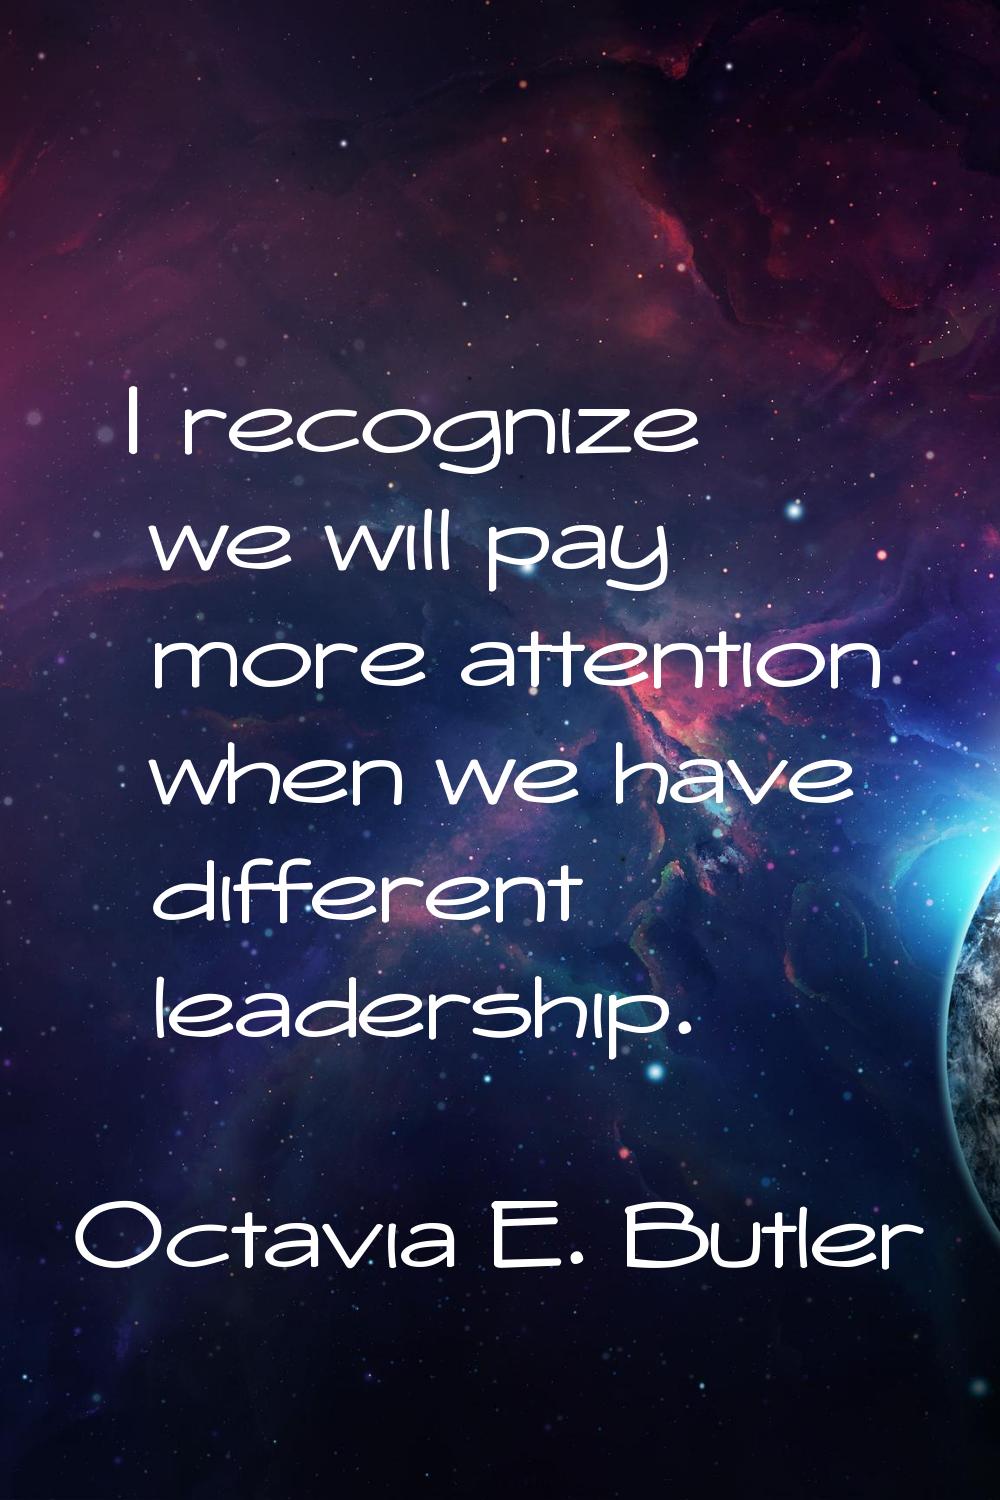 I recognize we will pay more attention when we have different leadership.